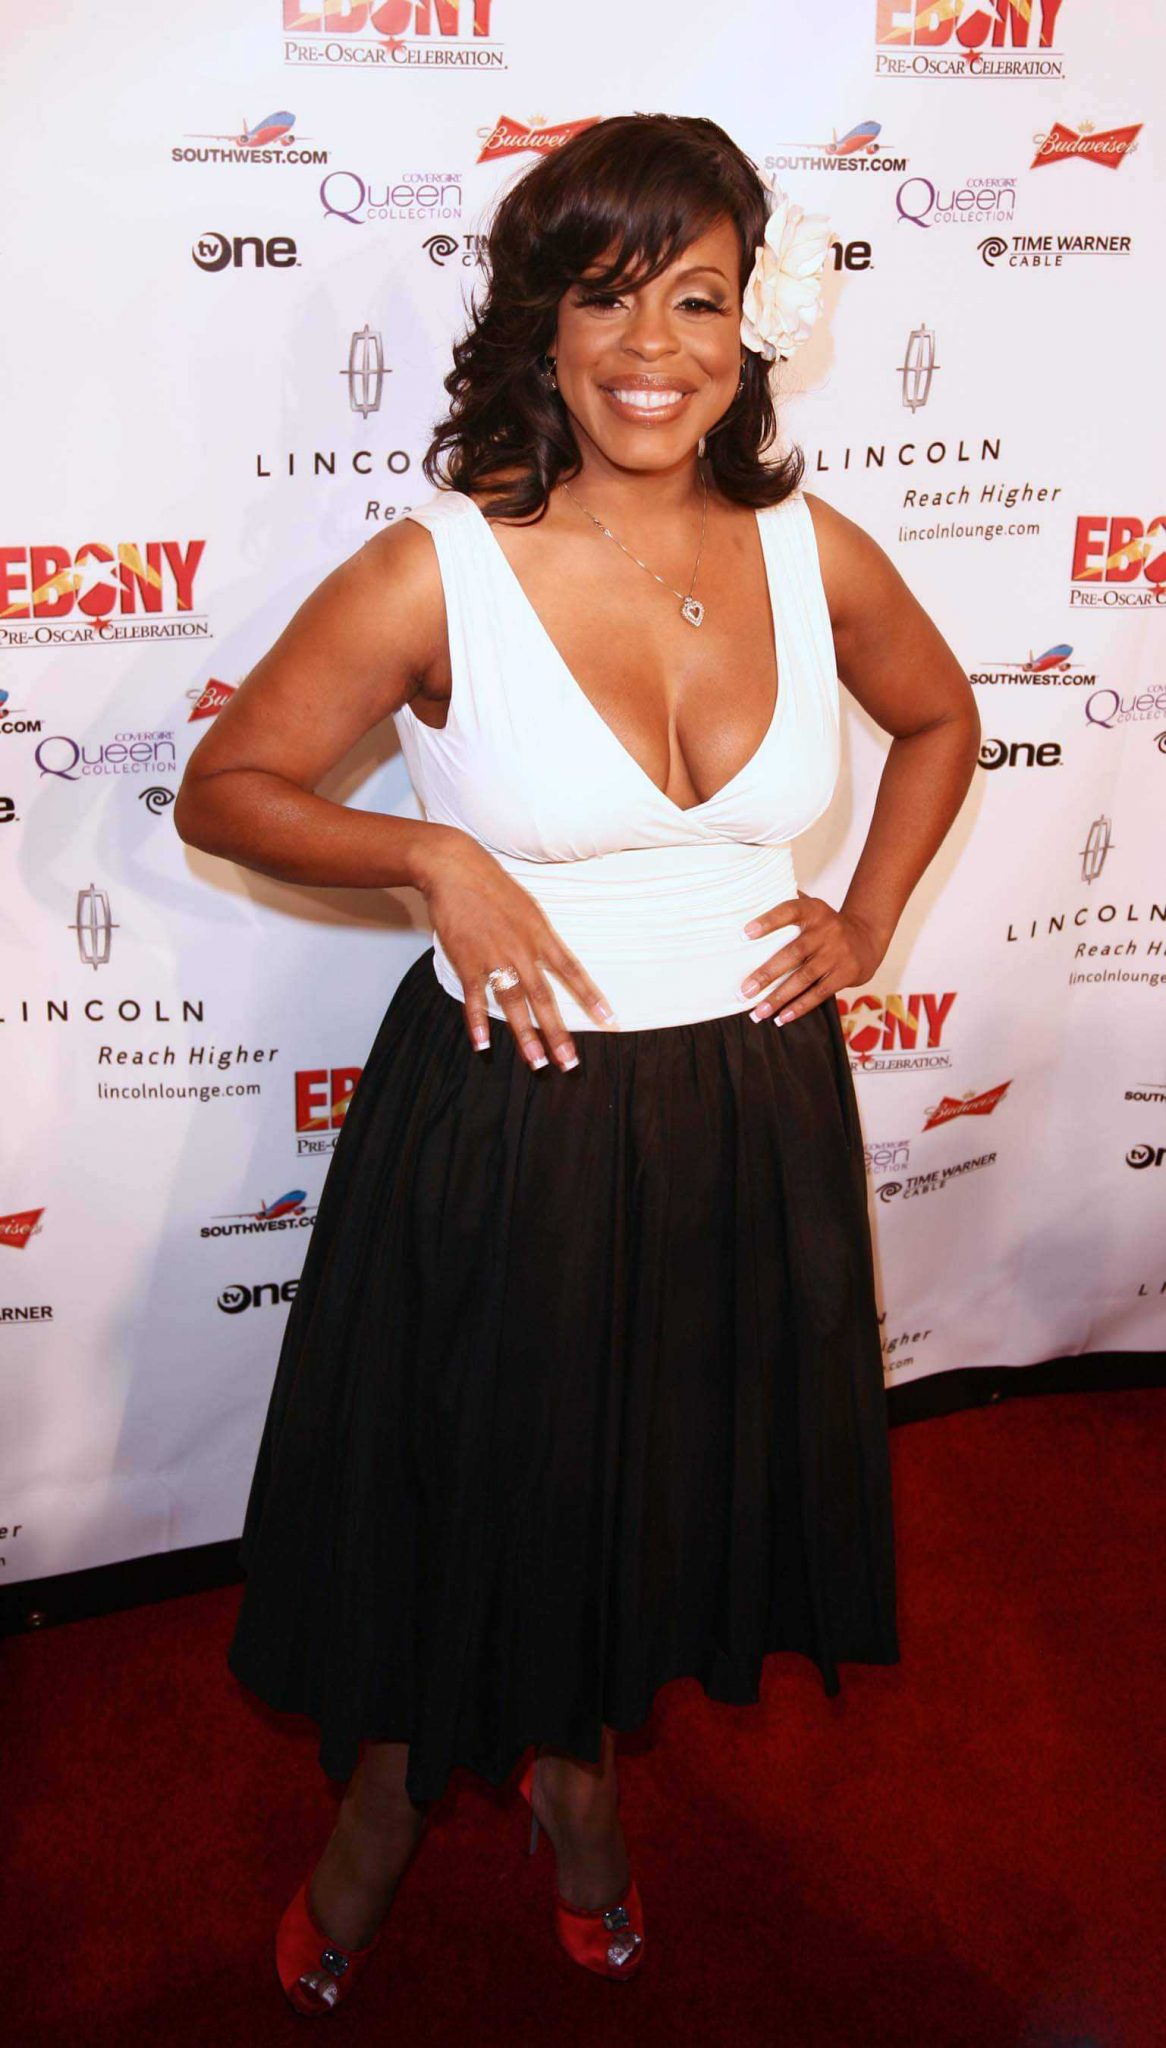 46 Niecy Nash Nude Pictures Display Her As A Skilled Performer 14